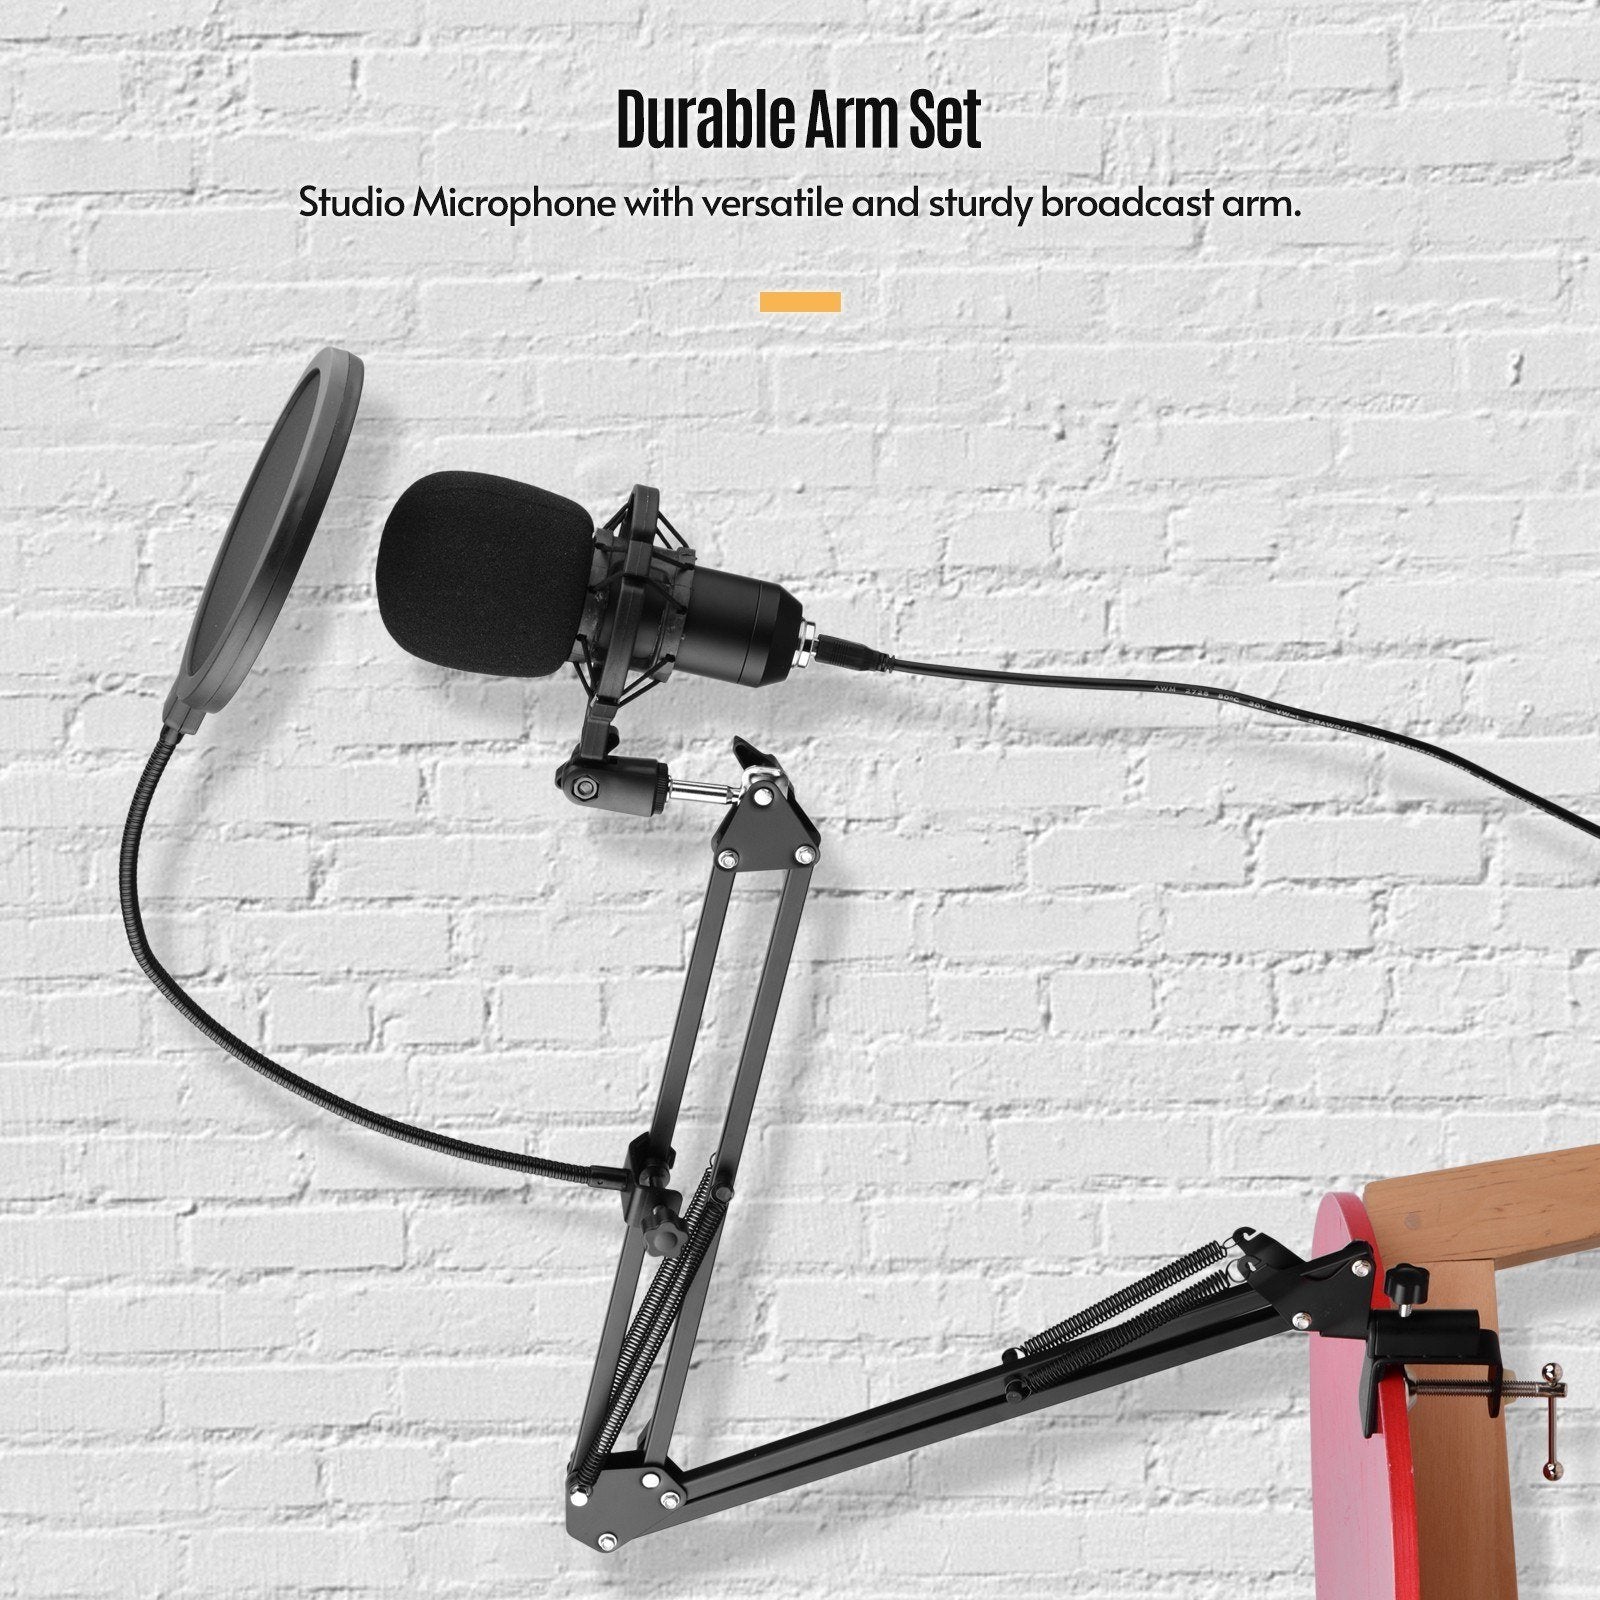 USB Condenser Microphone Set with Desk Mounting Clamp Scissor Arm Stand Pop Filter Muff Shock Mount Cable